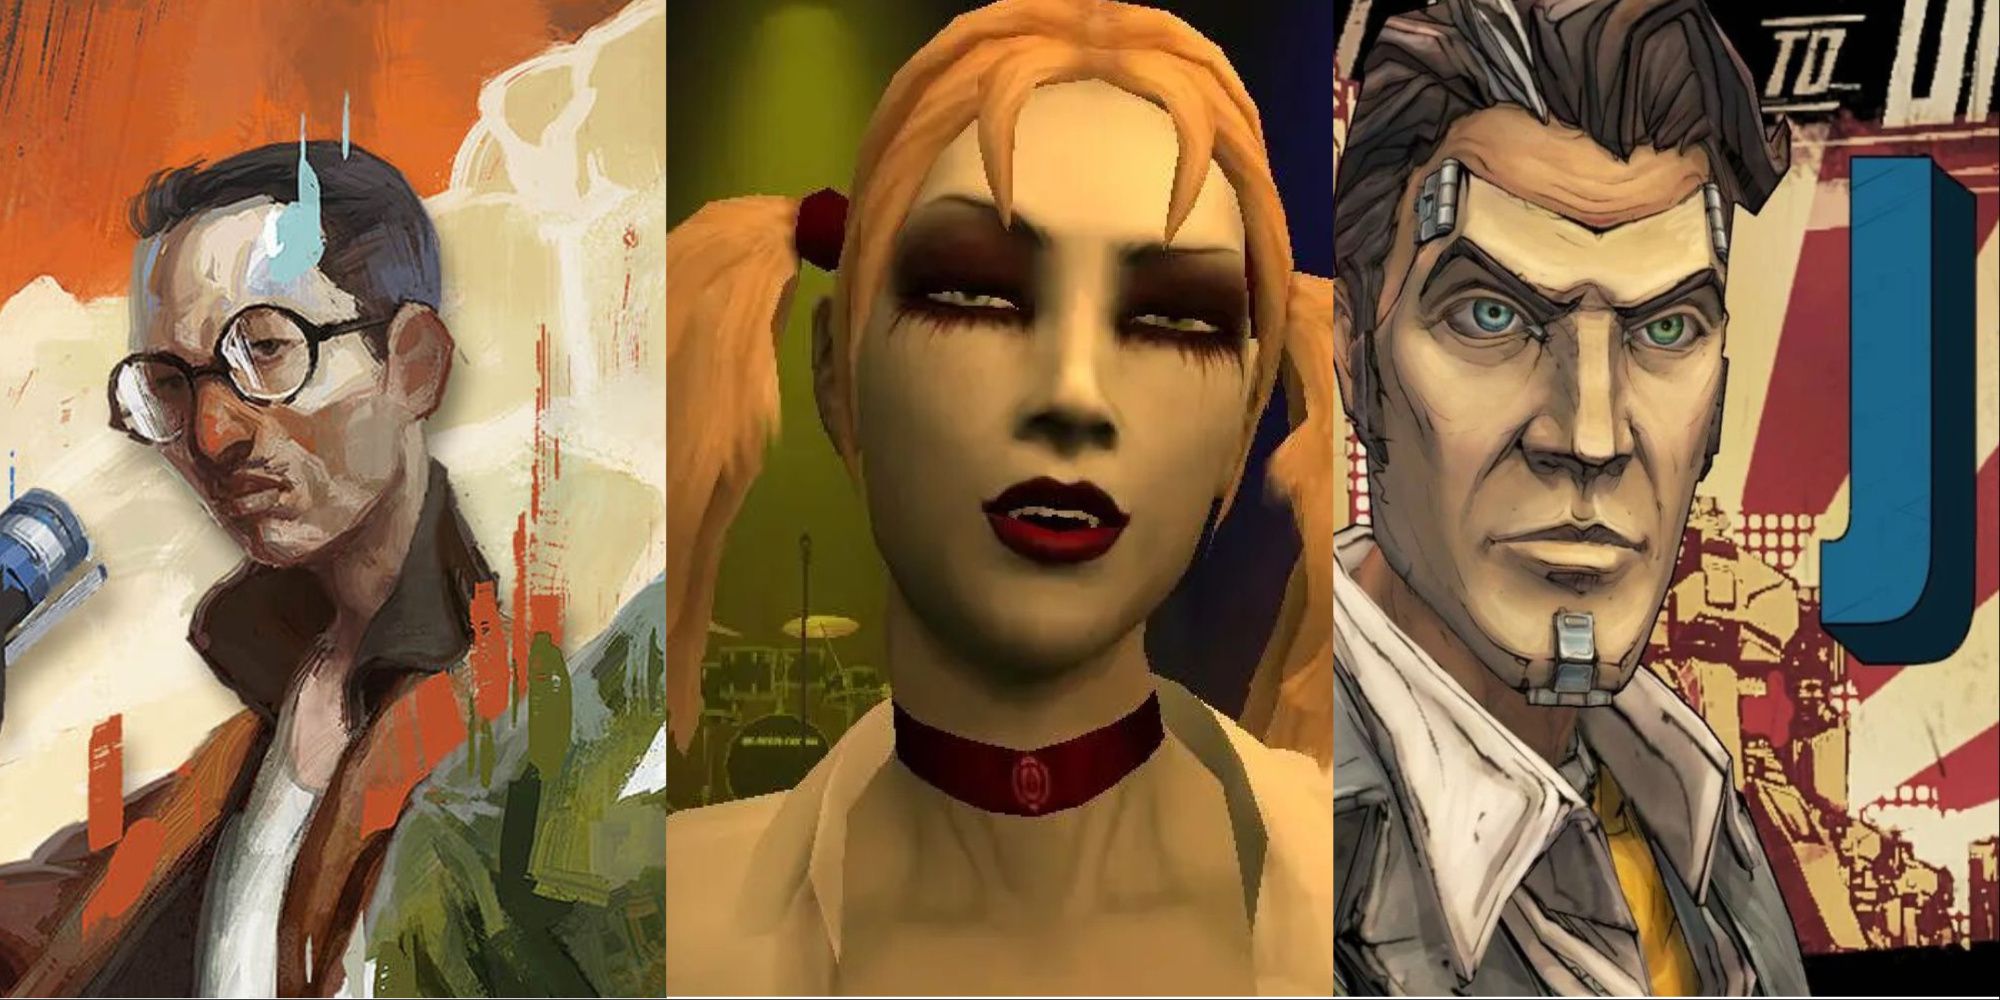 From left to right: Kim Kitsuragi from Disco Elysium, Jeanette Voerman from VTMB, and Handsome Jack from Borderlands 2